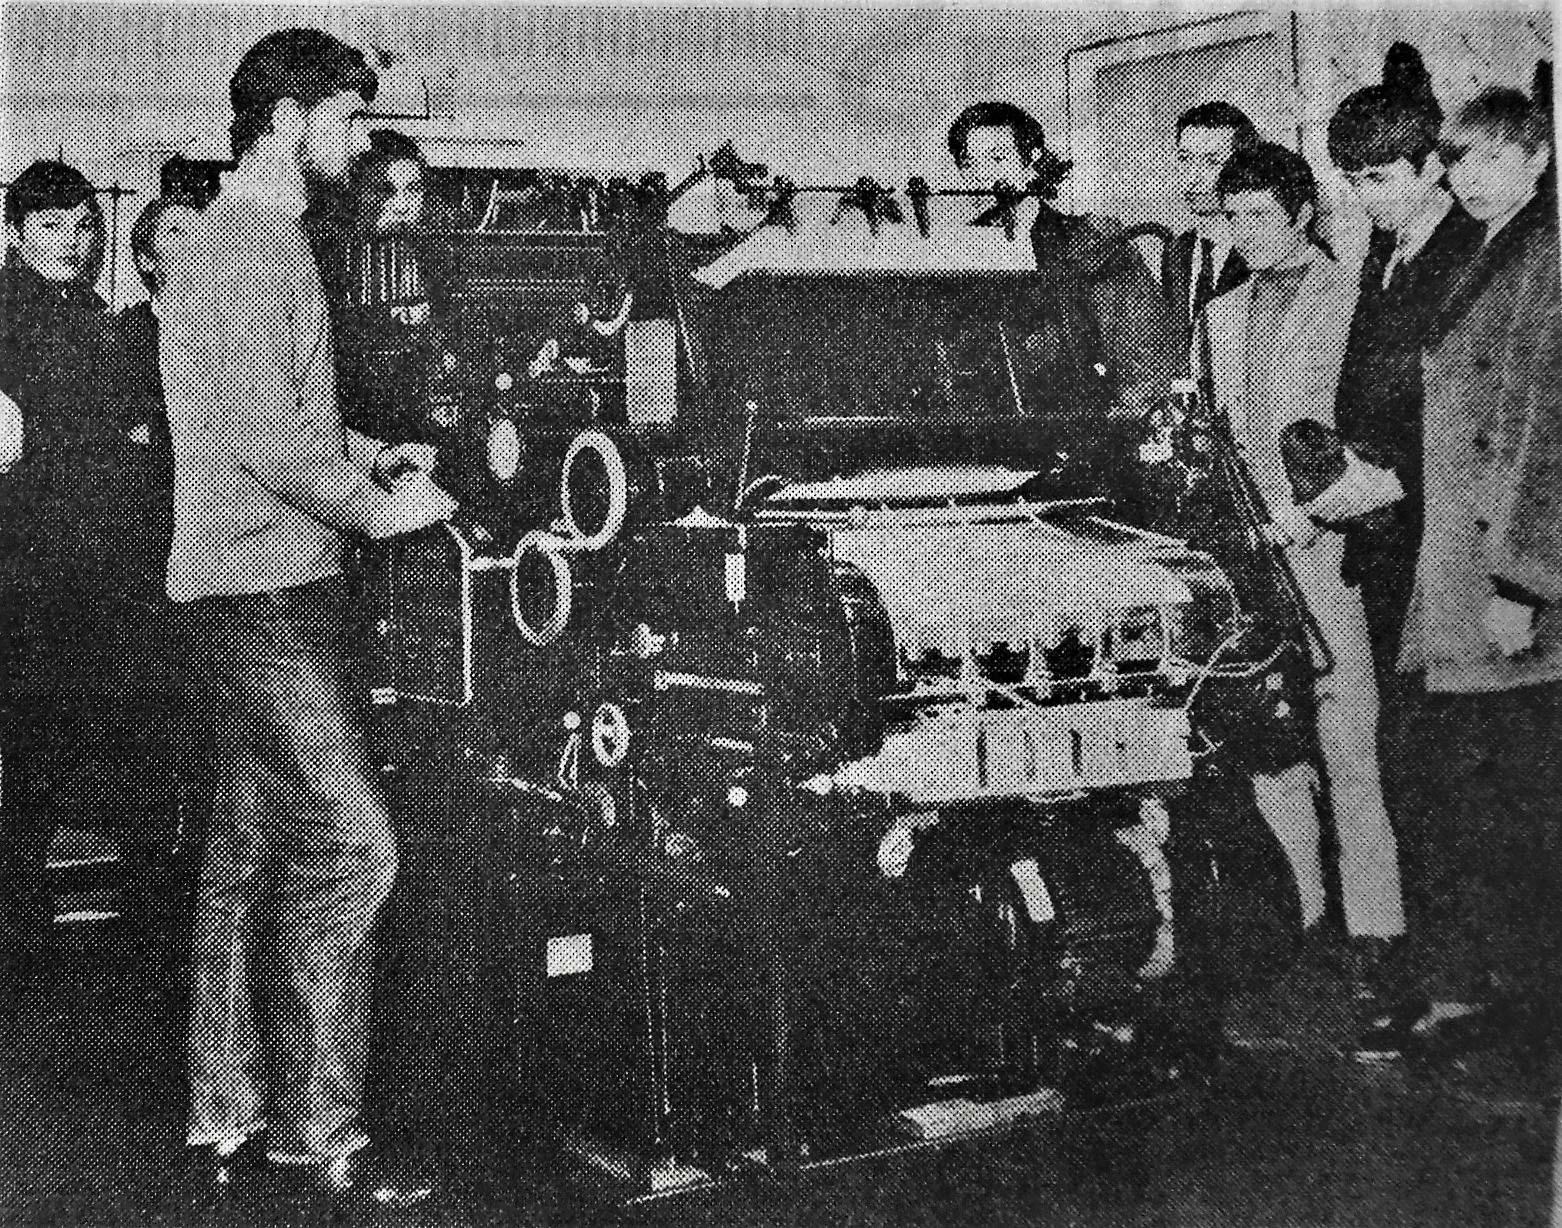 LEARNING A TRADE: Students at Reading College studied printing